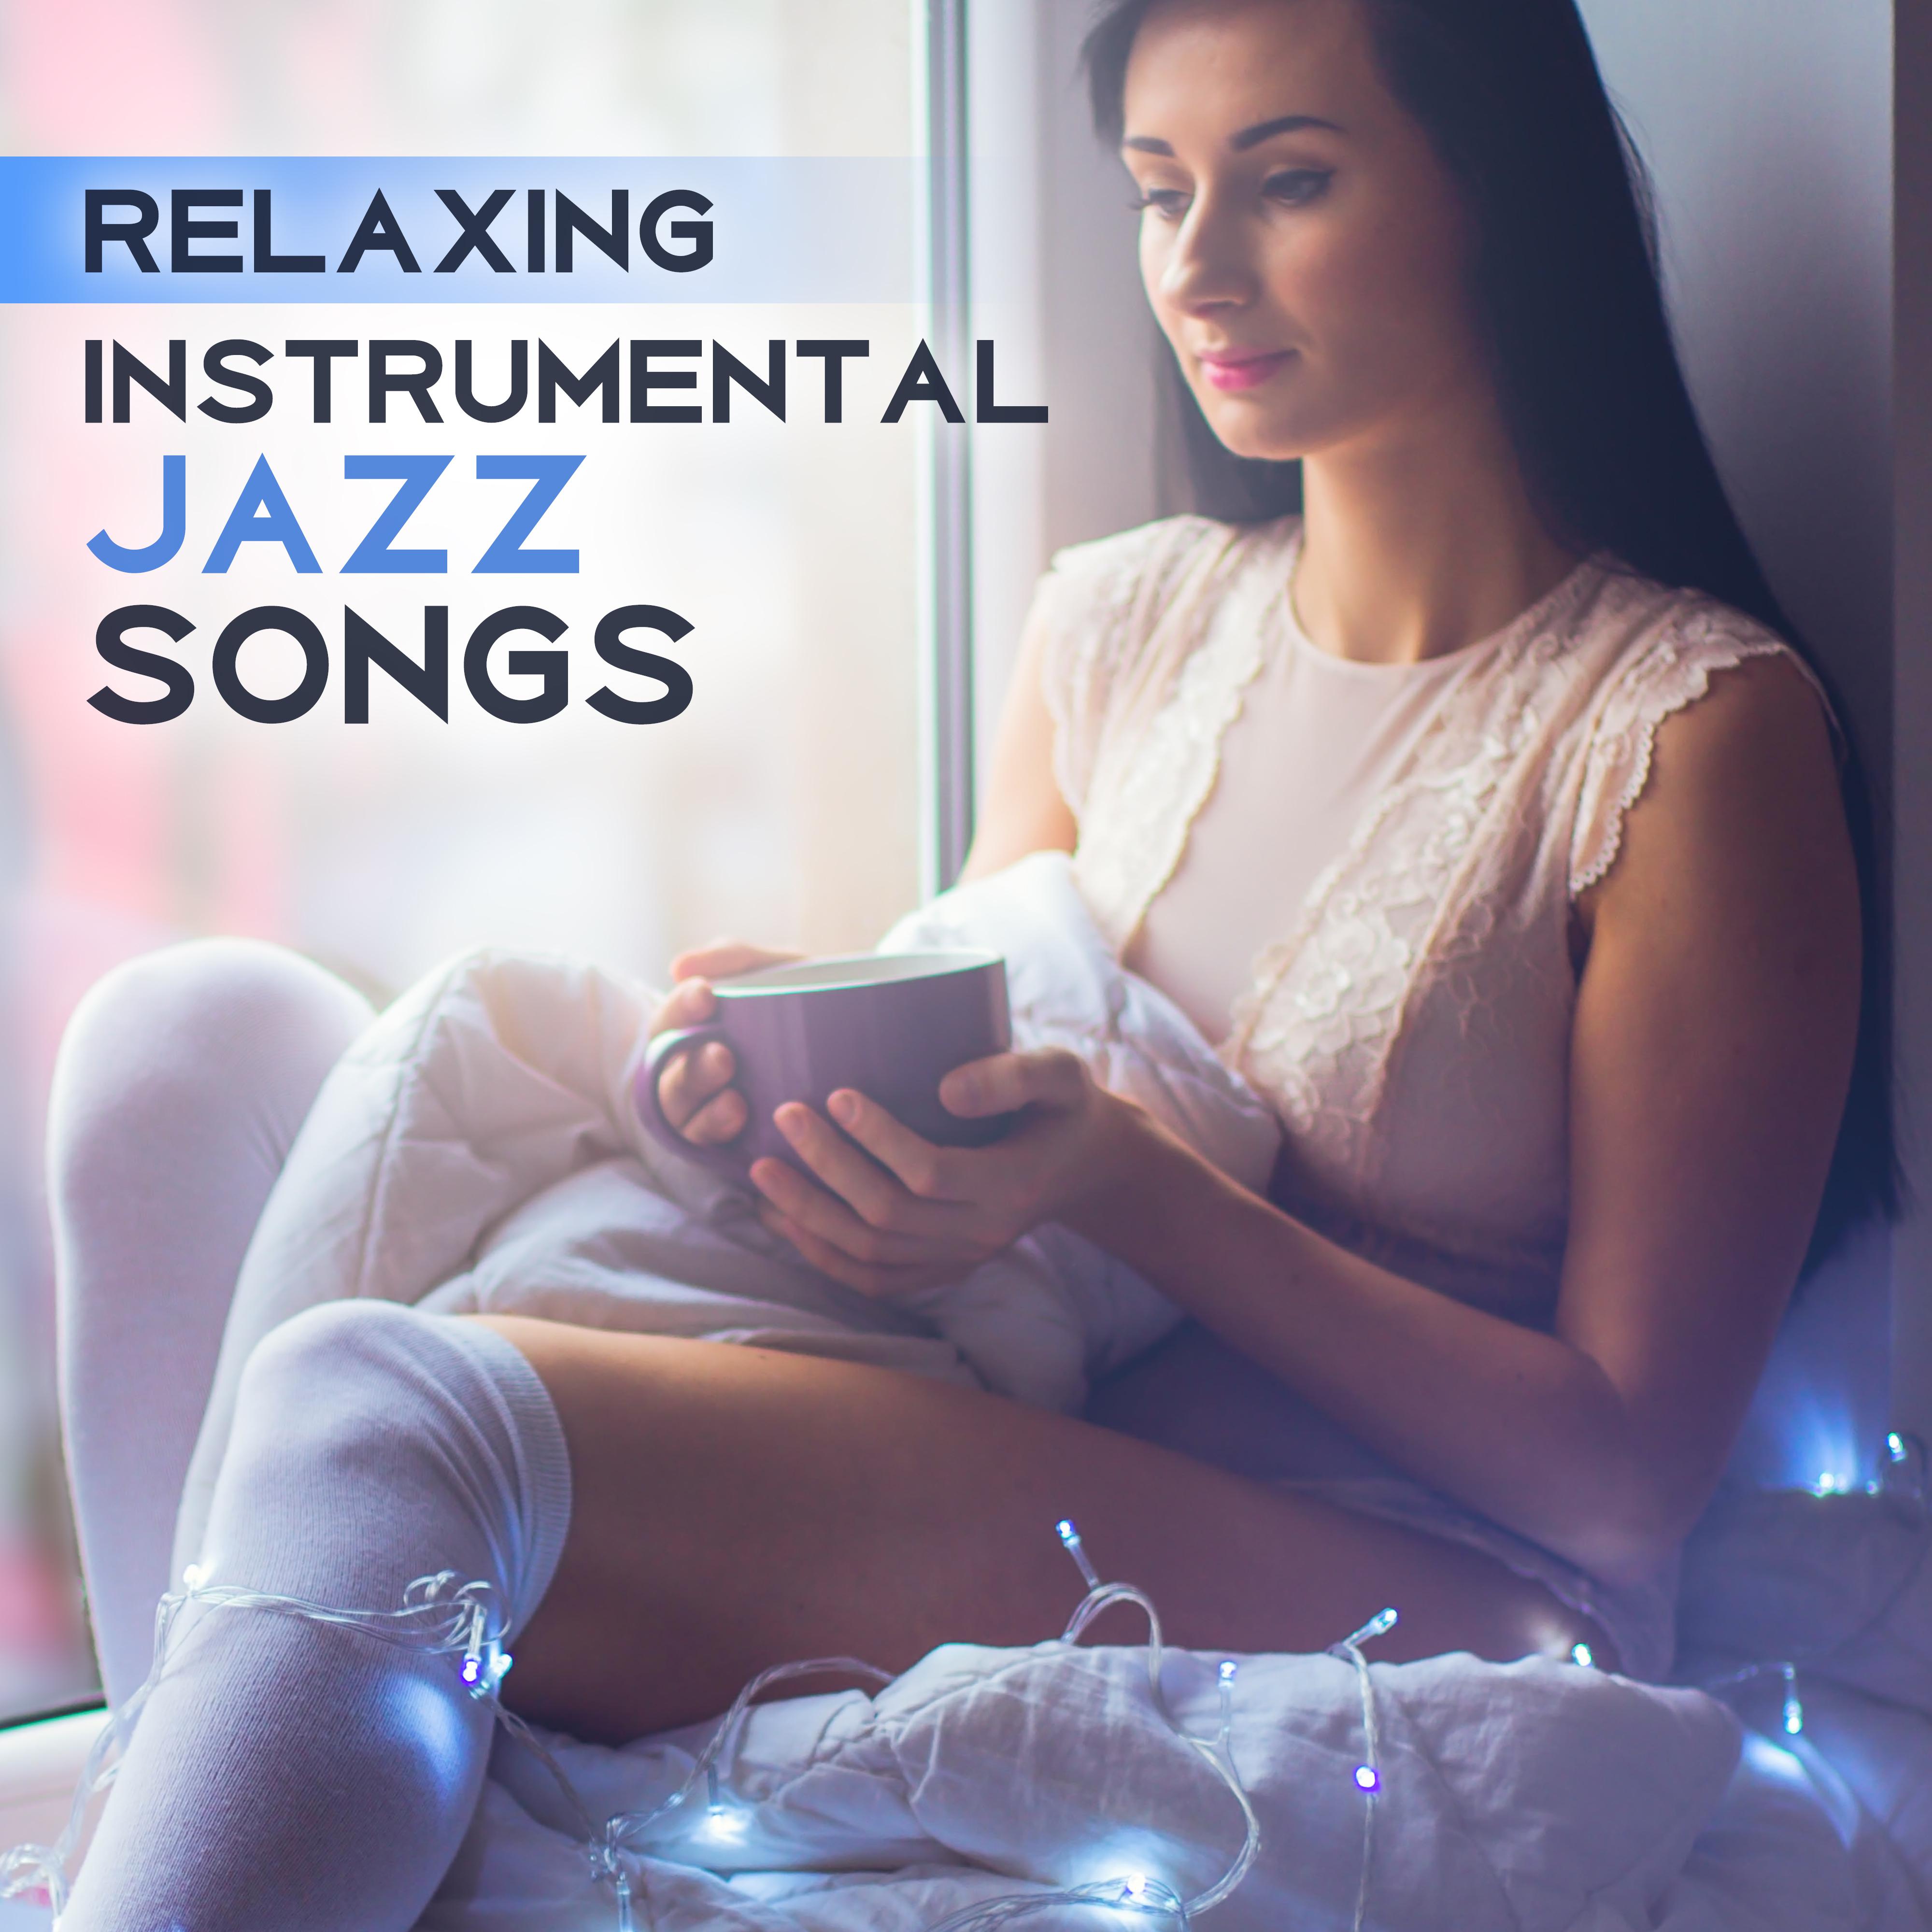 Relaxing Instrumental Jazz Songs  The Best Background Jazz for Restaurant, Coffee Rest, Stress Relief